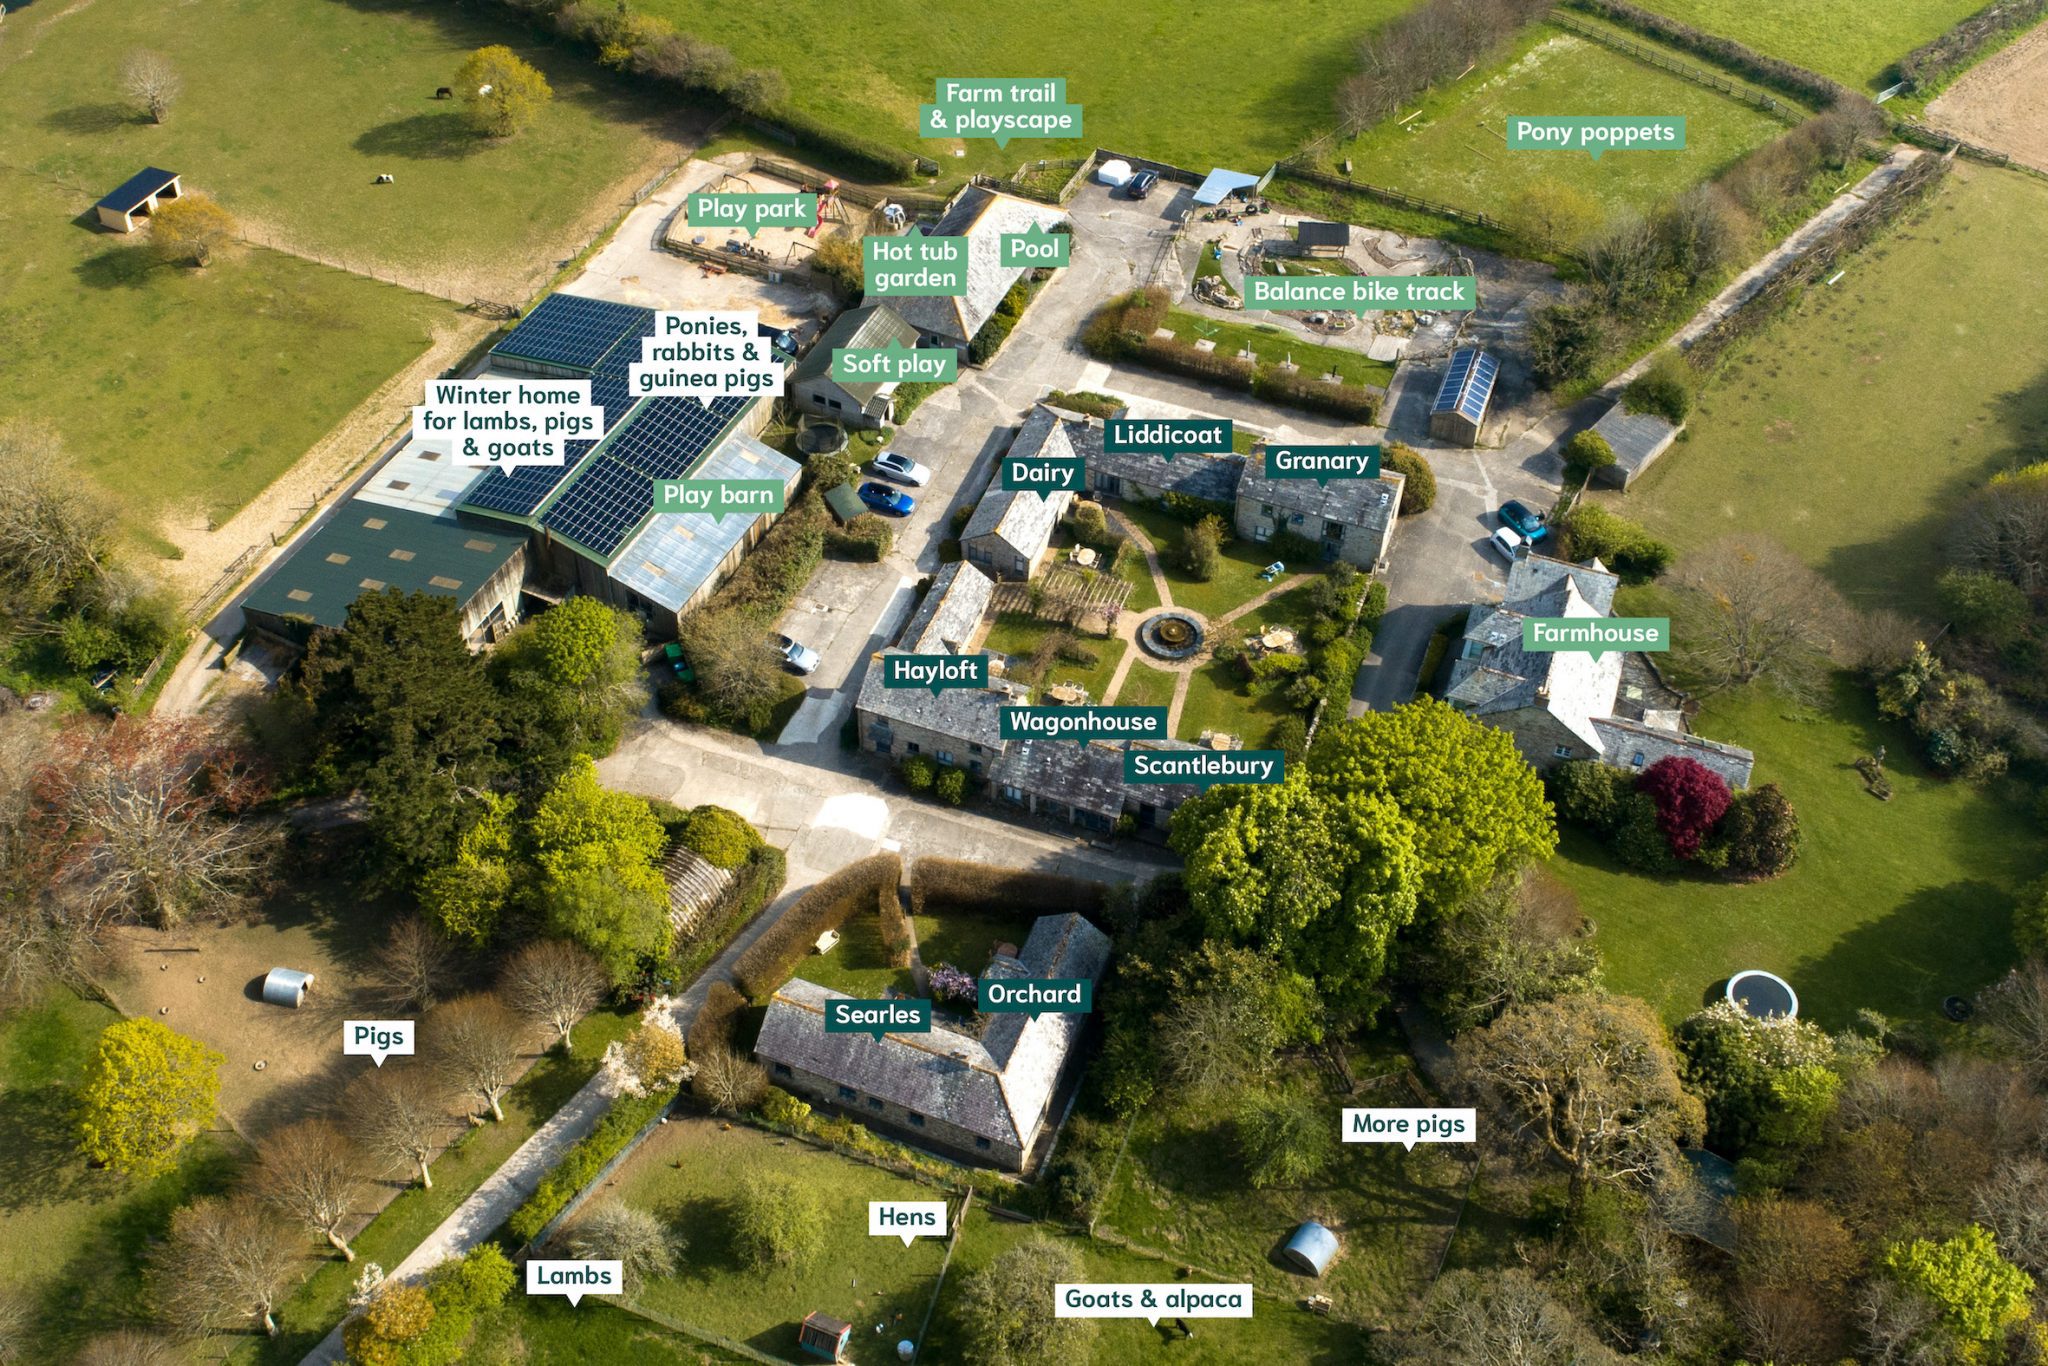 Aerial image of Tredethick Farm Cottages in Cornwall, UK